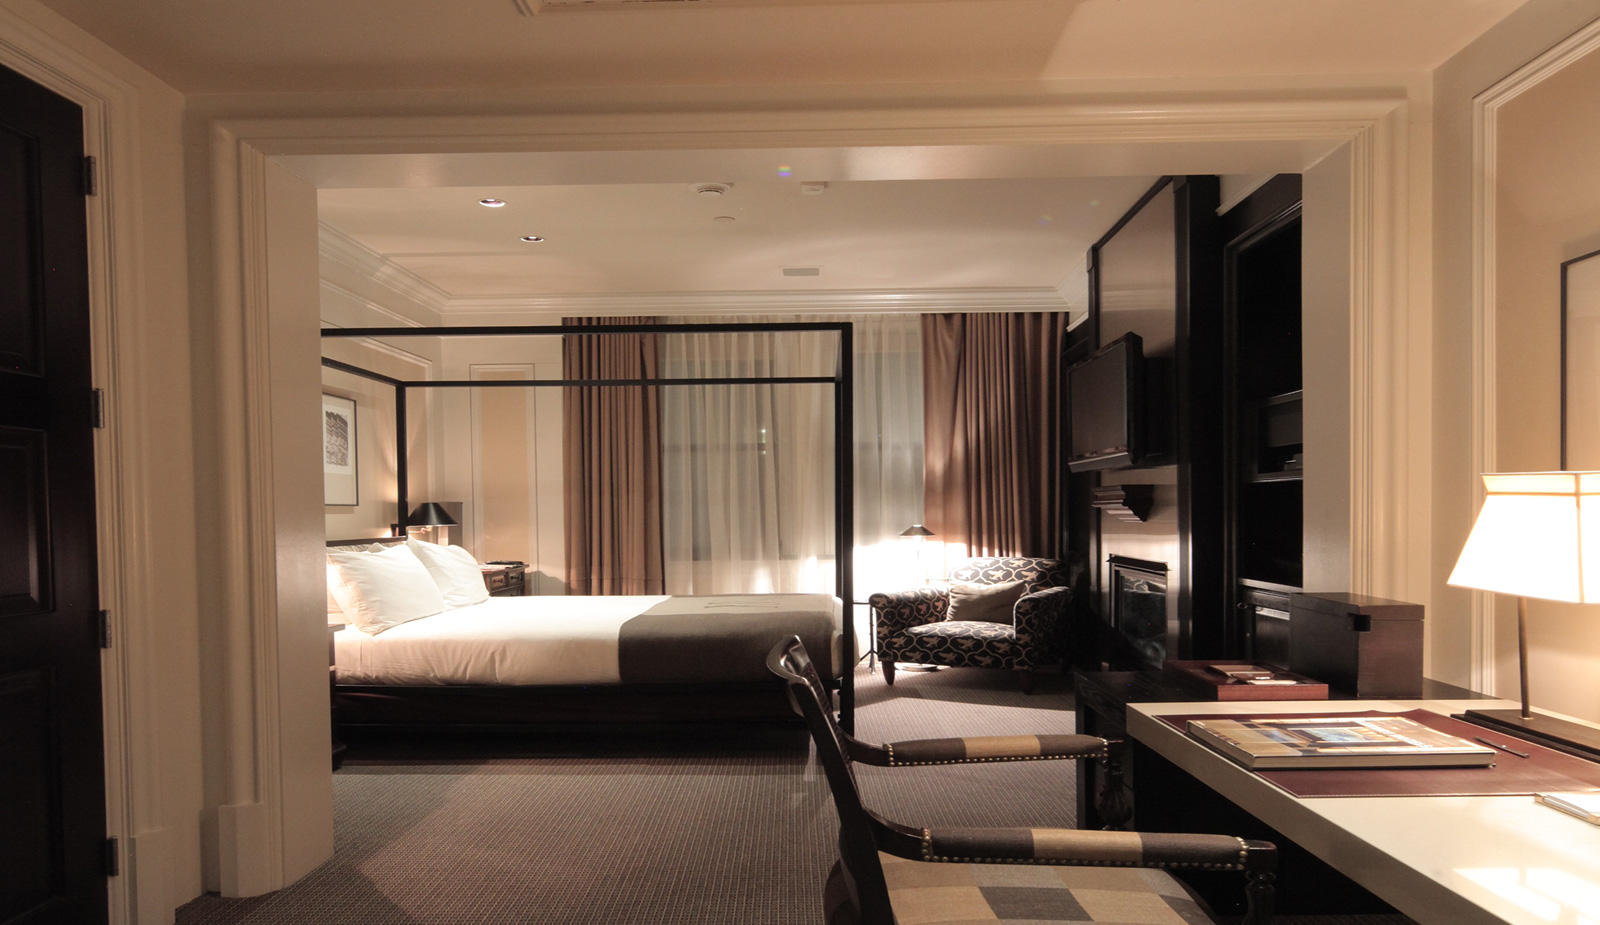 XV Beacon, a luxury Hotel in Boston. View of a spacious hotel room with ambient lighting and large windows.